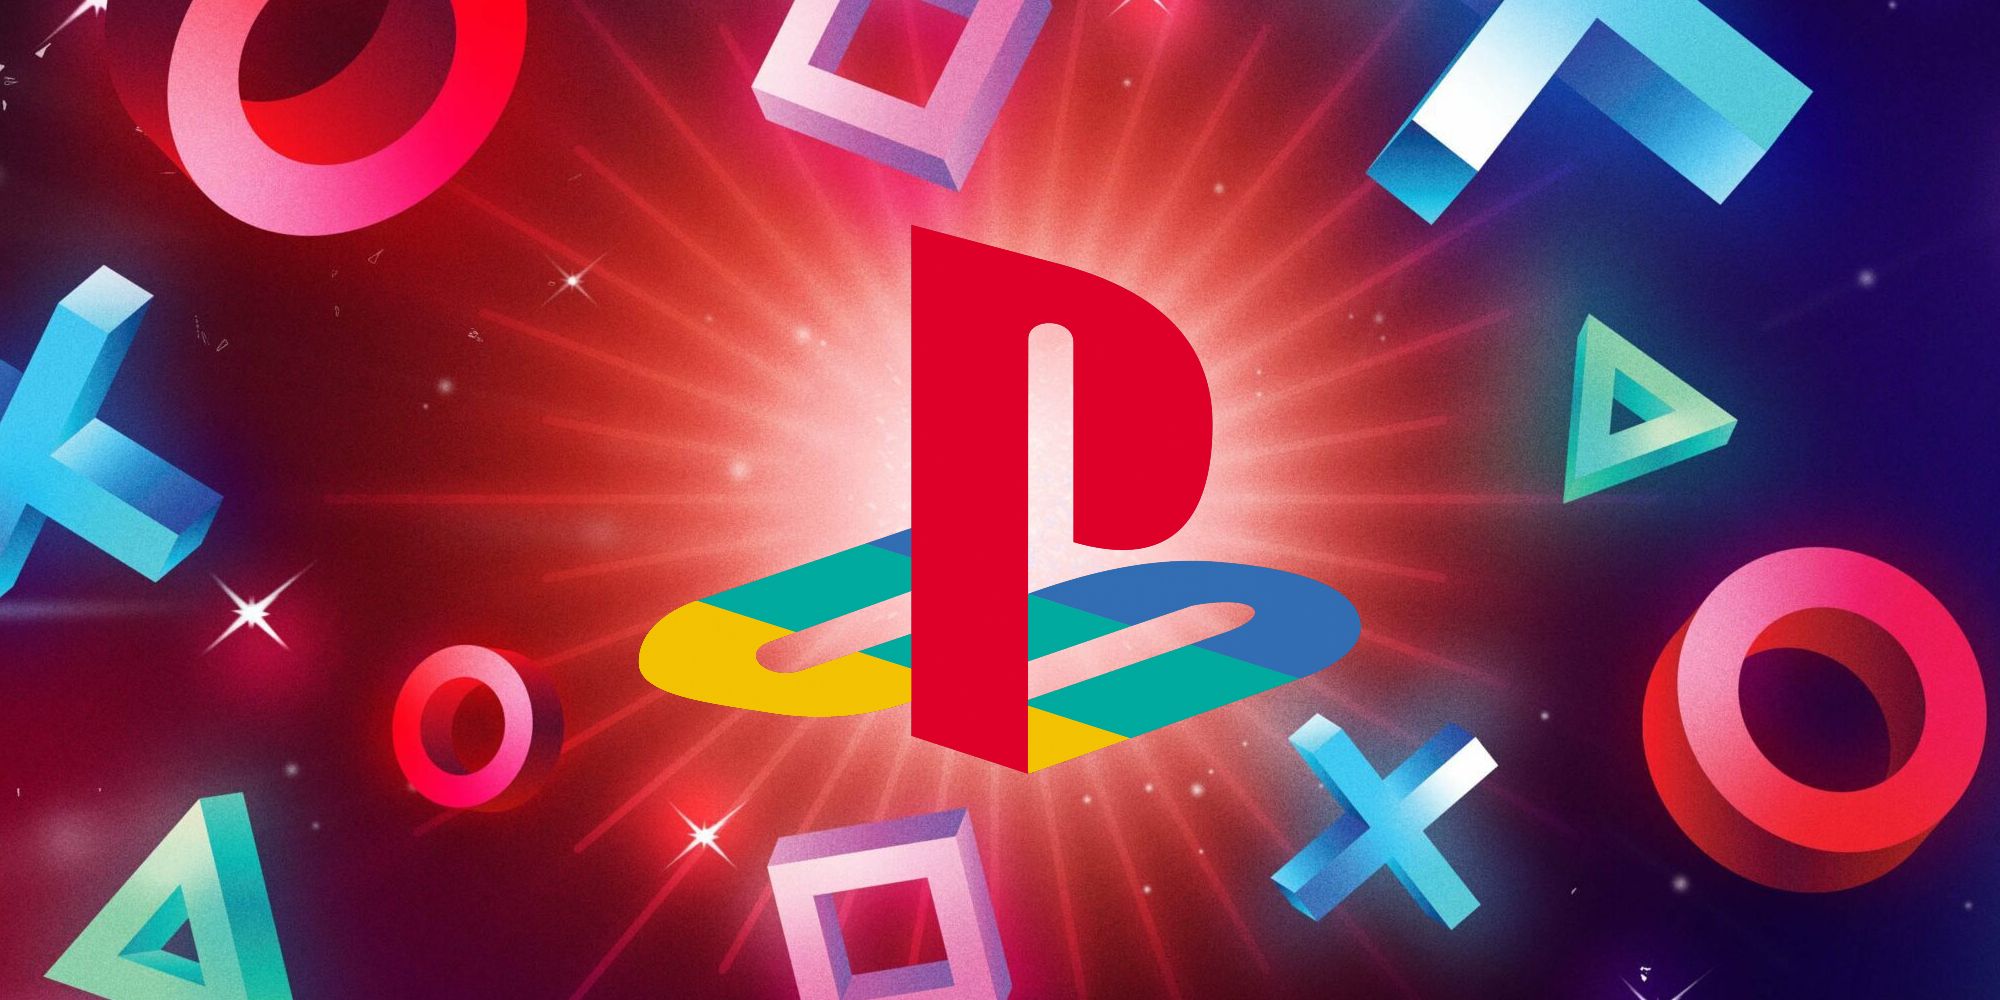 Best PlayStation Deals, Prices, and Bundles: July 2021